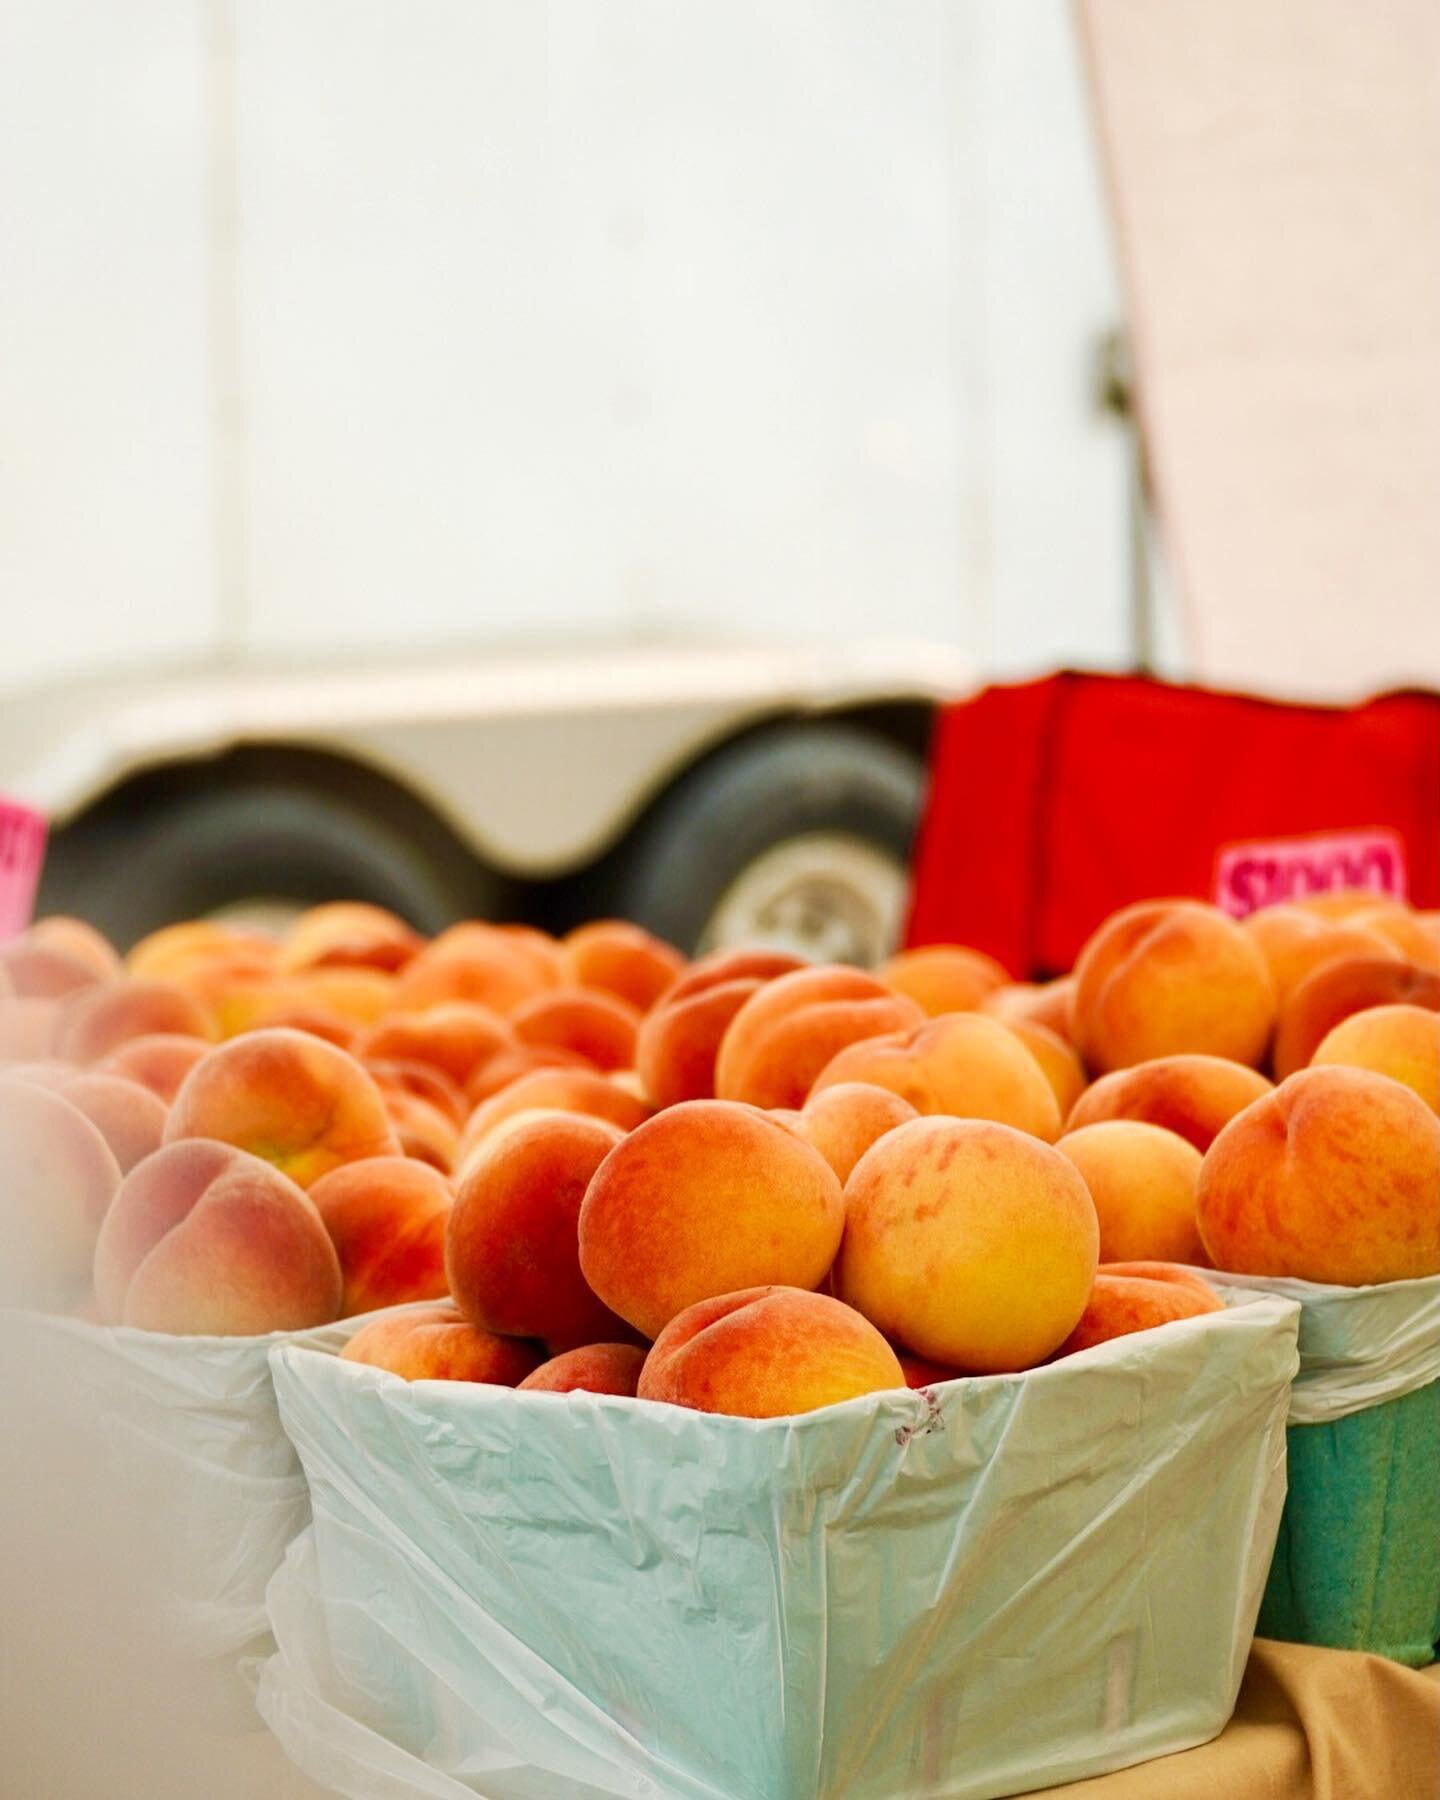 It&rsquo;s looking like a peachy Monday today at the market! 🍑🍑🍑

Lots of our local Okanagan farmers have peaches including: 
Summer Farms
Sadi Farms
Sunshine Orchards
K + R Orchards
KM Orchards 
Ringo-En Farms
Gambell Farms

&amp; we have raspber